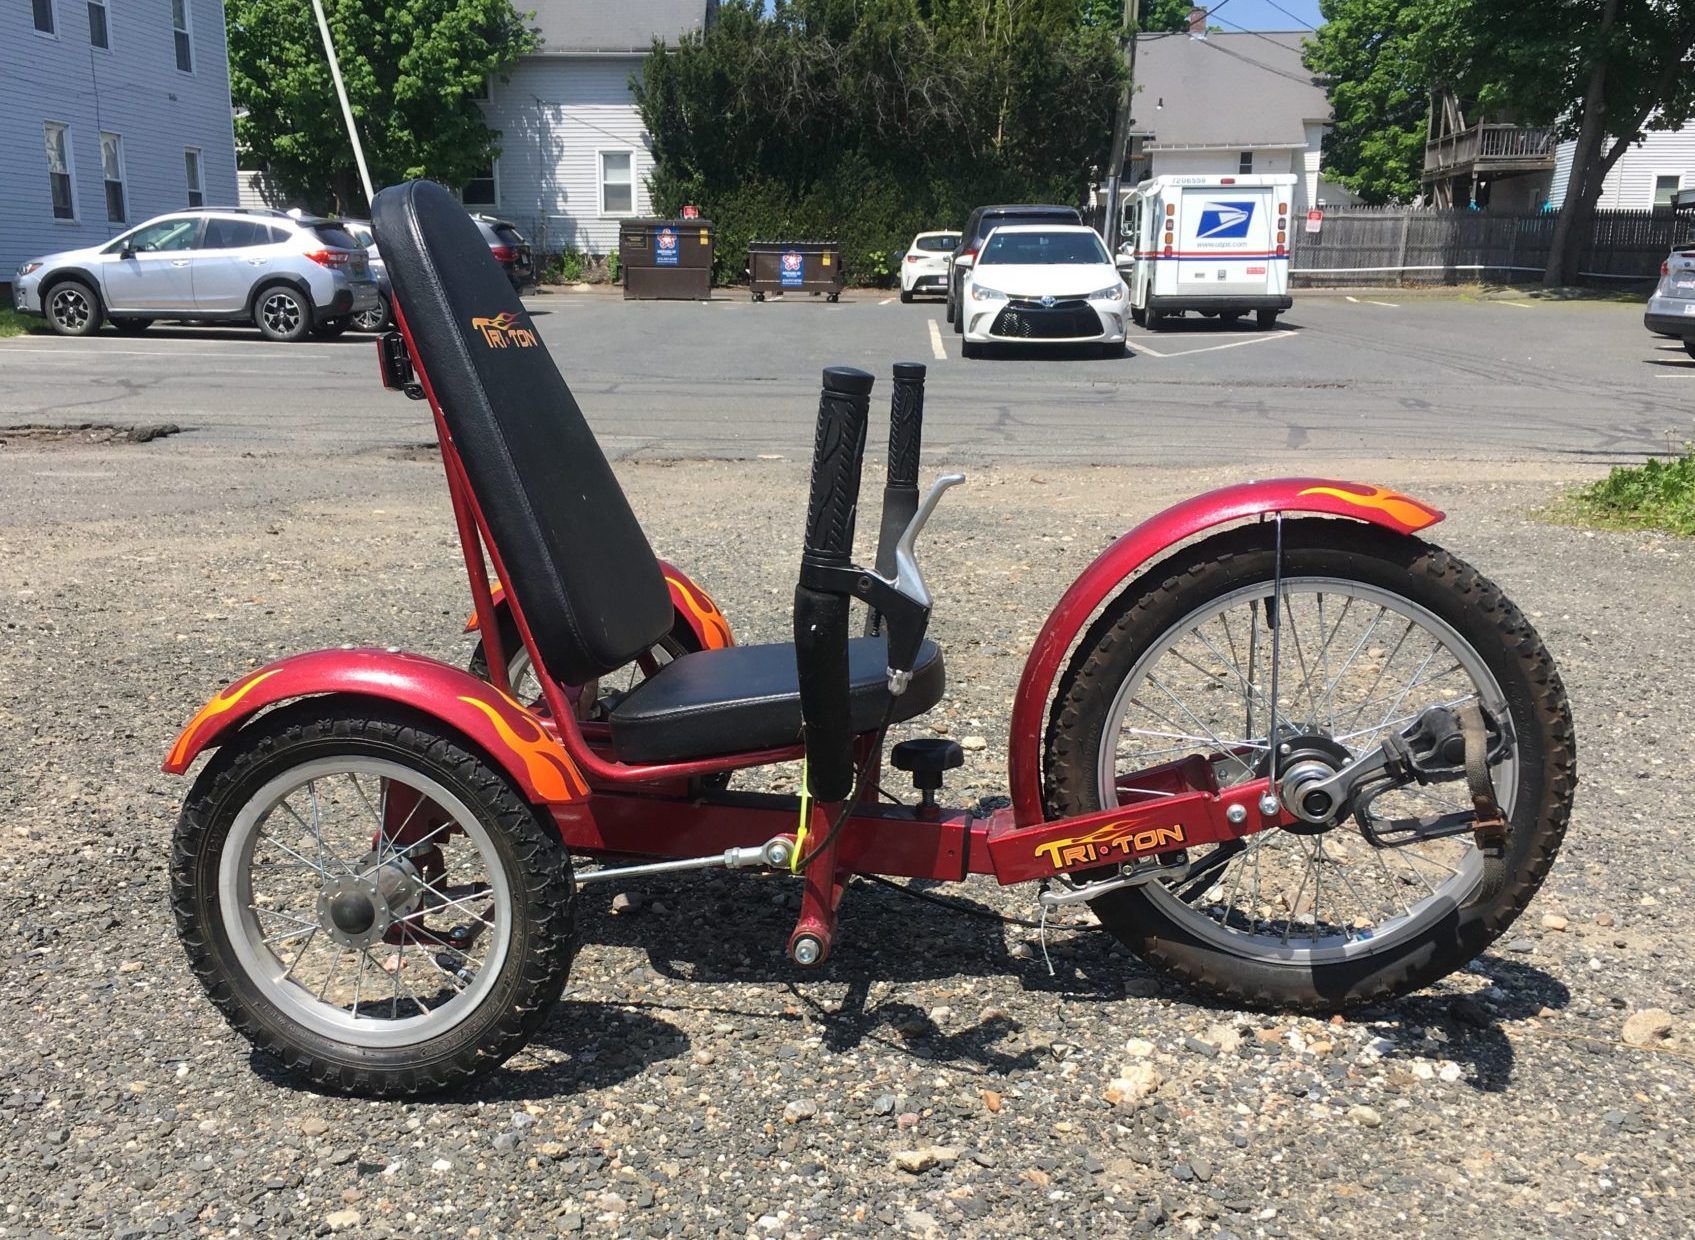 A small, upright kids trike in red with a flame motif and fat tires is parked in a parking lot.